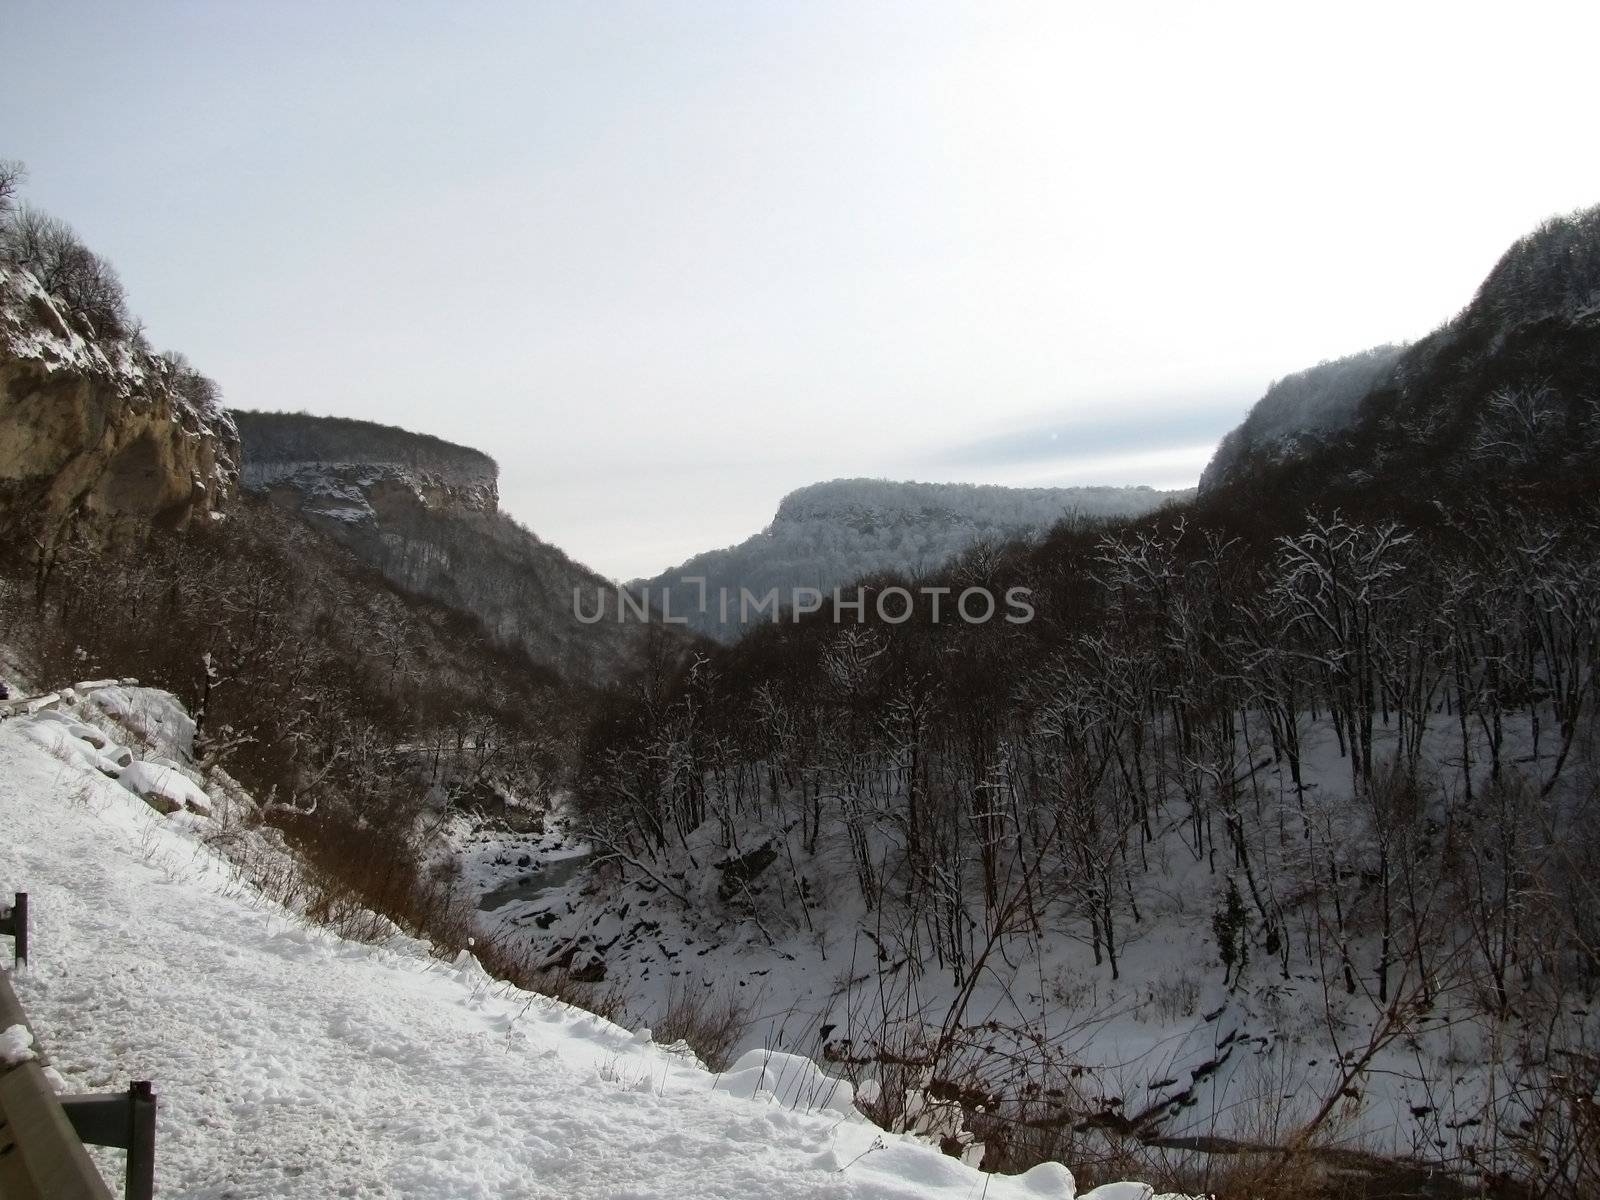 Canyon, winter; gorge, wood, snow; relief by Viktoha